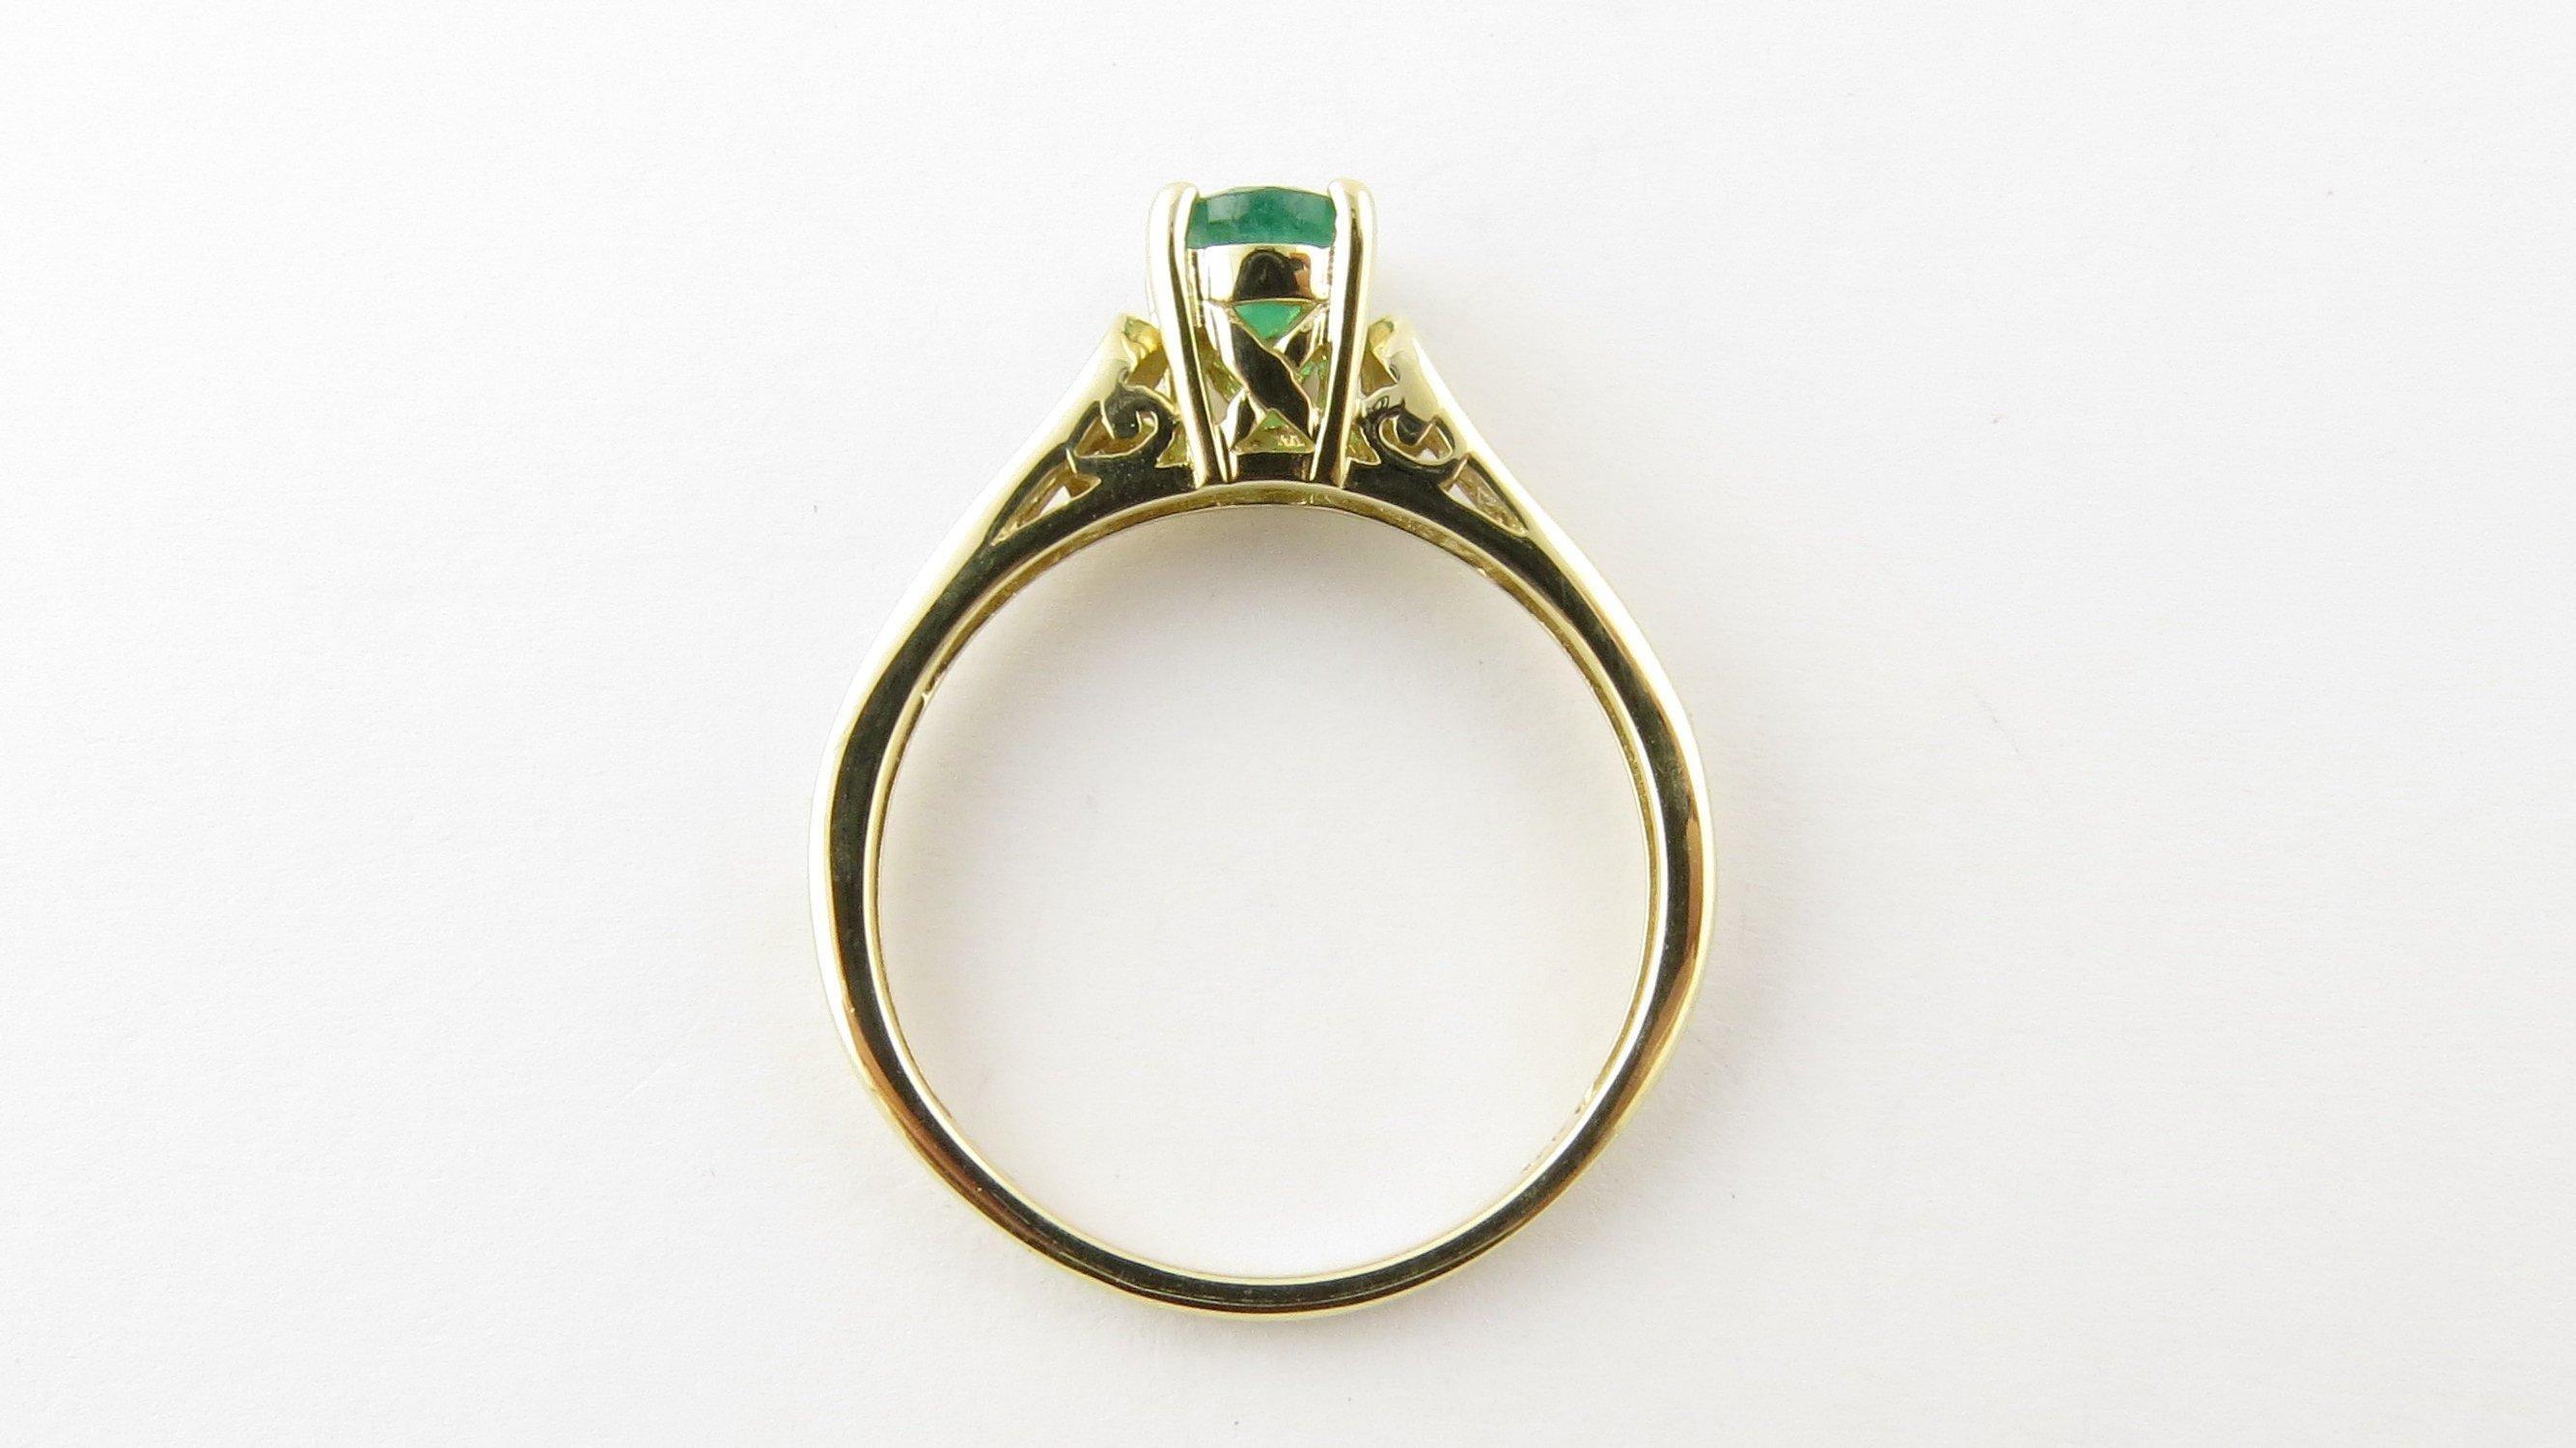 Vintage 14 Karat Yellow Gold Emerald and Diamond Ring Size 9.25- This lovely ring features one oval genuine emerald (7 mm x 5 mm) accented with 14 round brilliant cut diamonds and set in classic 14K yellow gold. Setting height: 8 mm. Shank: 1.5 mm.